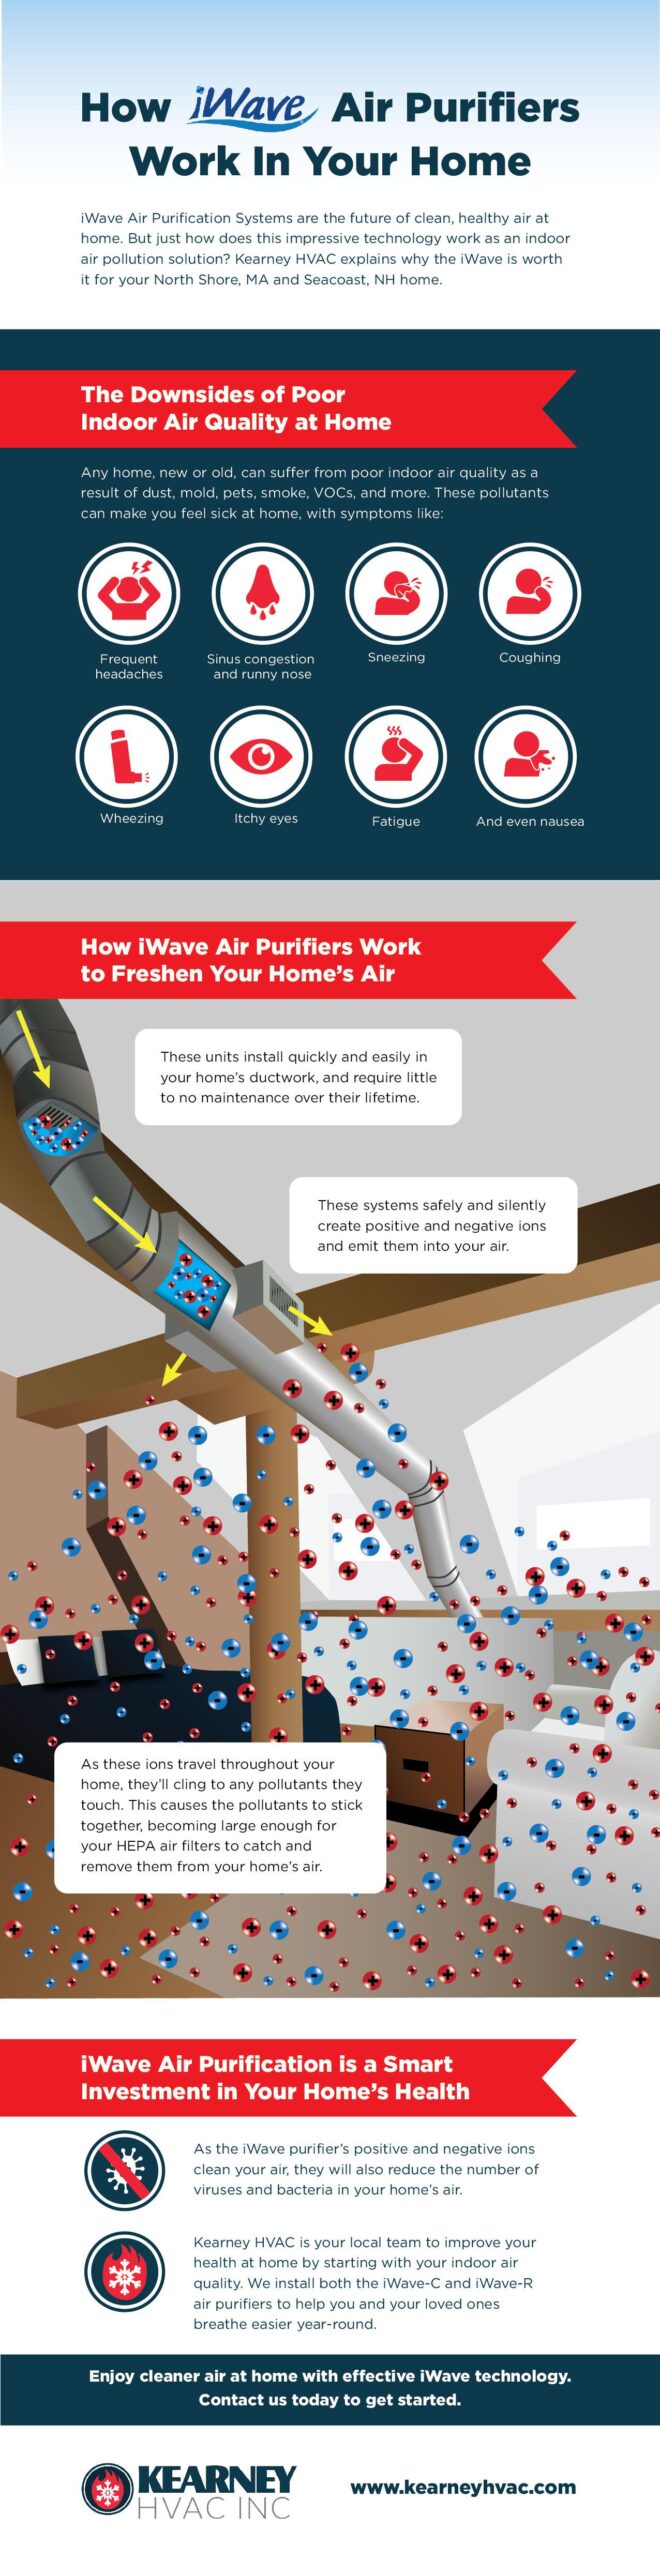 How iWave Air Purifiers Work In Your Home Infographic